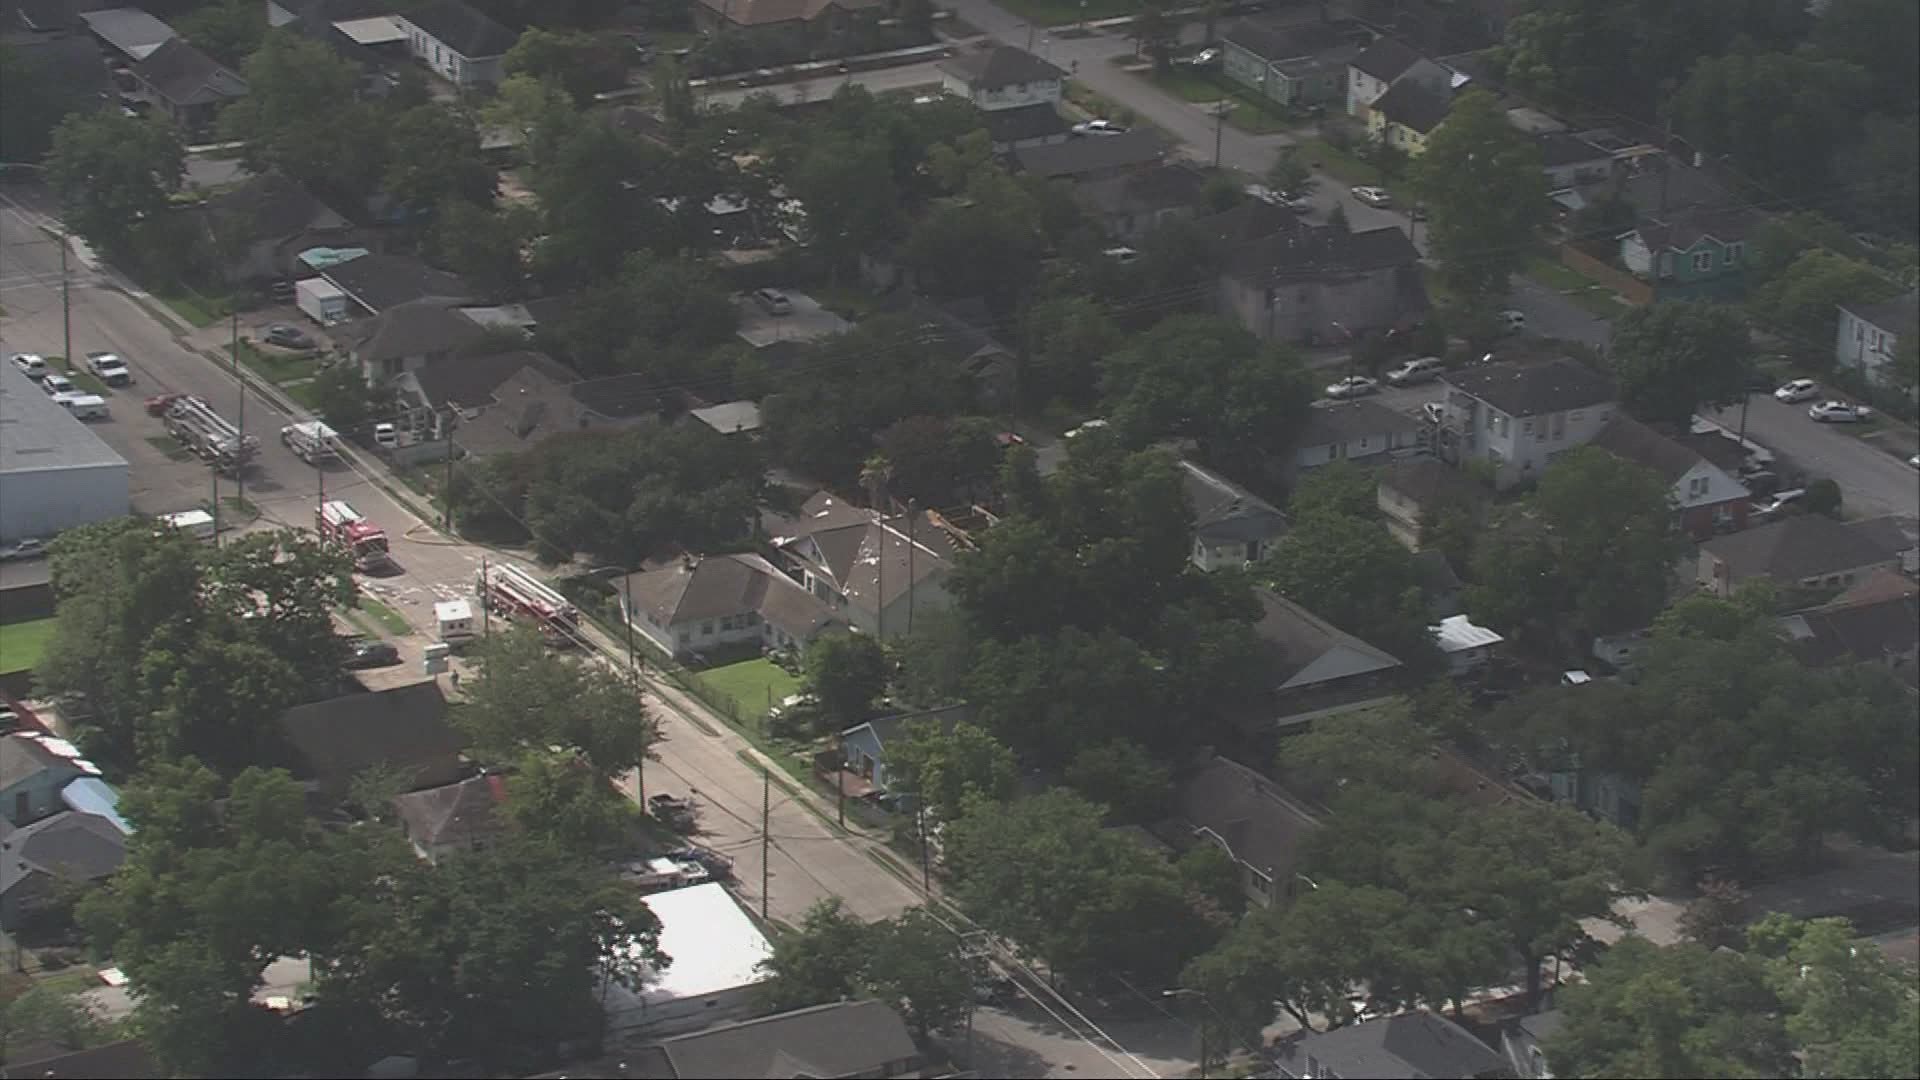 The roof was blown off a home in the Second Ward in an explosion Friday morning. AIR 11 flew over the scene about 20 minutes after it happened.